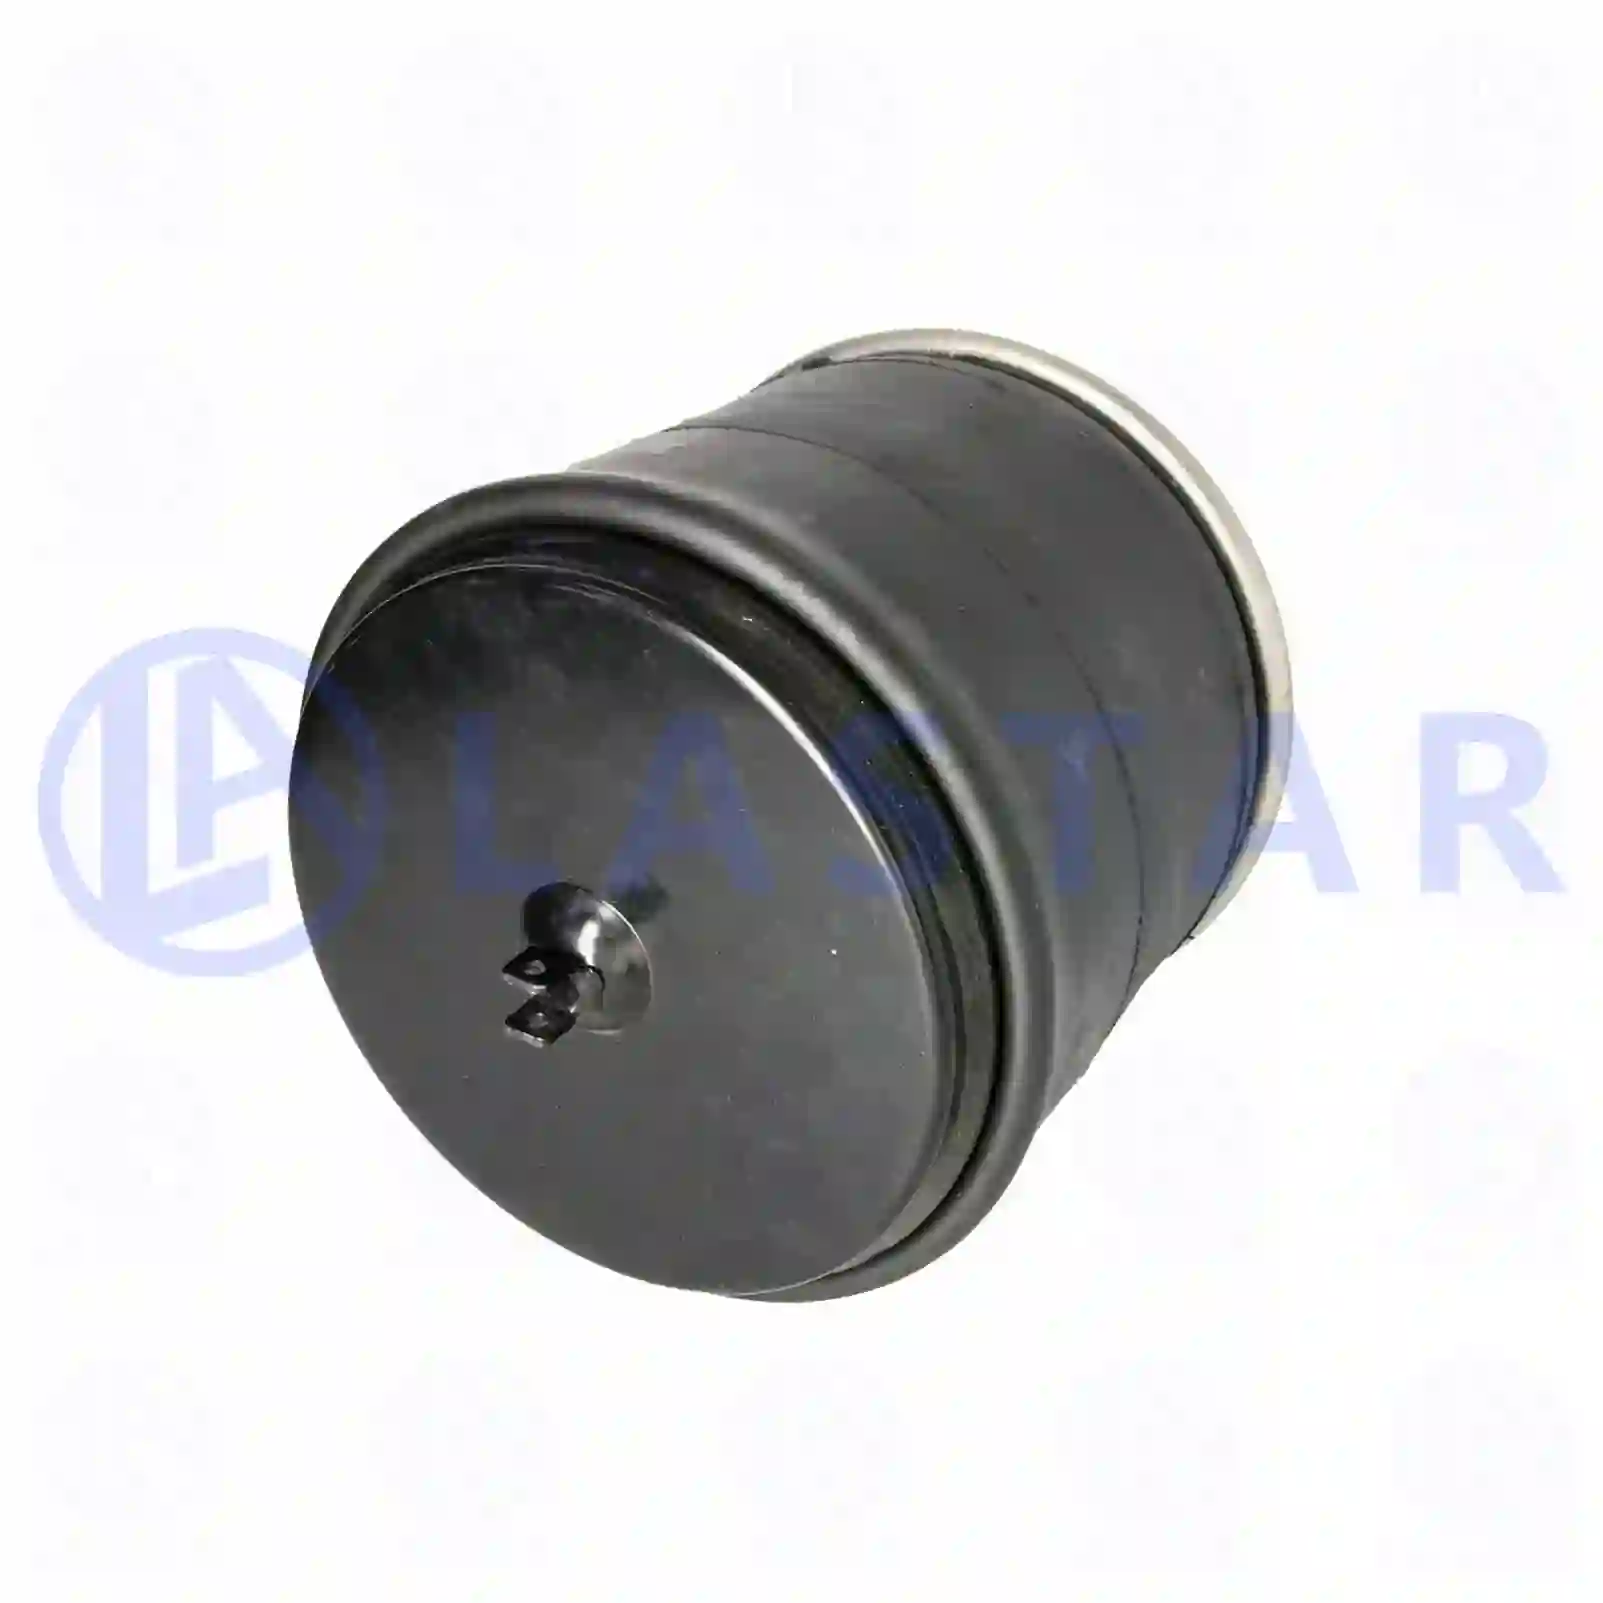 Air spring, with steel piston, 77727163, MLF7082, MLF7171, 1075291, 1076075, 1076076, 20554756, 8158142, ZG40756-0008 ||  77727163 Lastar Spare Part | Truck Spare Parts, Auotomotive Spare Parts Air spring, with steel piston, 77727163, MLF7082, MLF7171, 1075291, 1076075, 1076076, 20554756, 8158142, ZG40756-0008 ||  77727163 Lastar Spare Part | Truck Spare Parts, Auotomotive Spare Parts